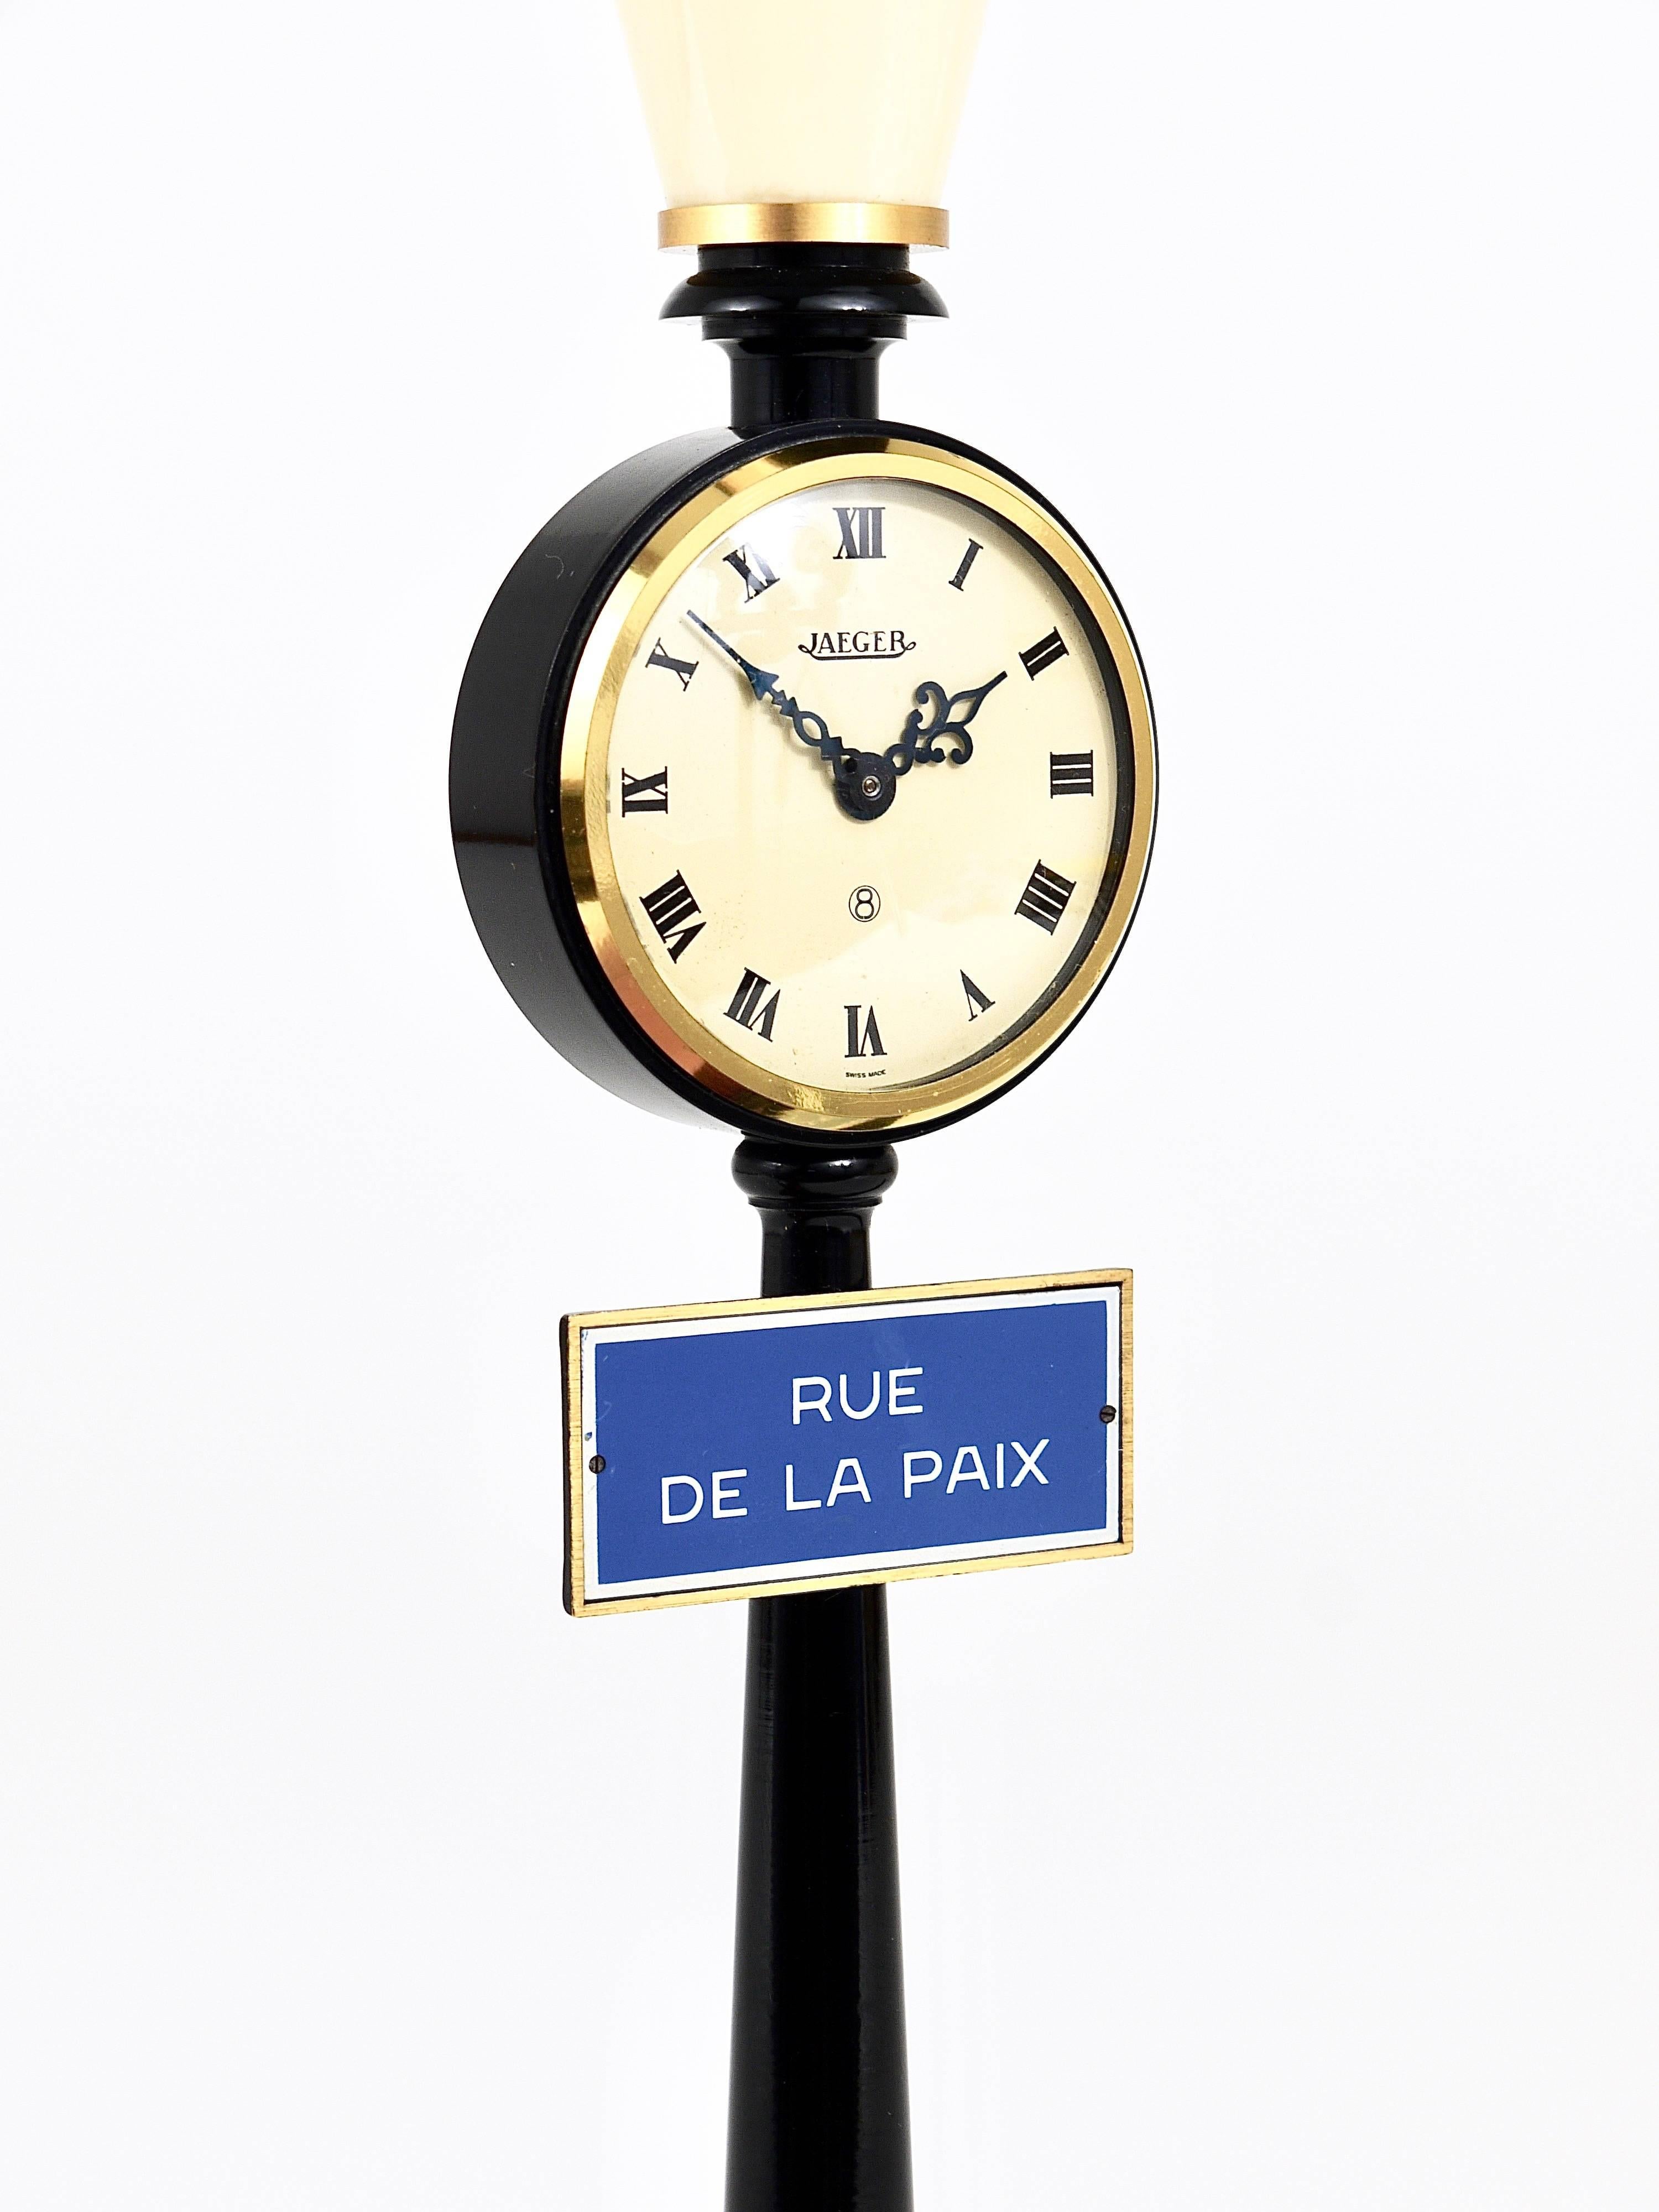 A beautiful black and gold desk or table clock in the shape a lantern / street light. Manufactured in the 1960s by Jaeger LeCoultre, Switzerland. This nice clock has a mechanical 8-days movement with manual winding. The clock works perfectly and is